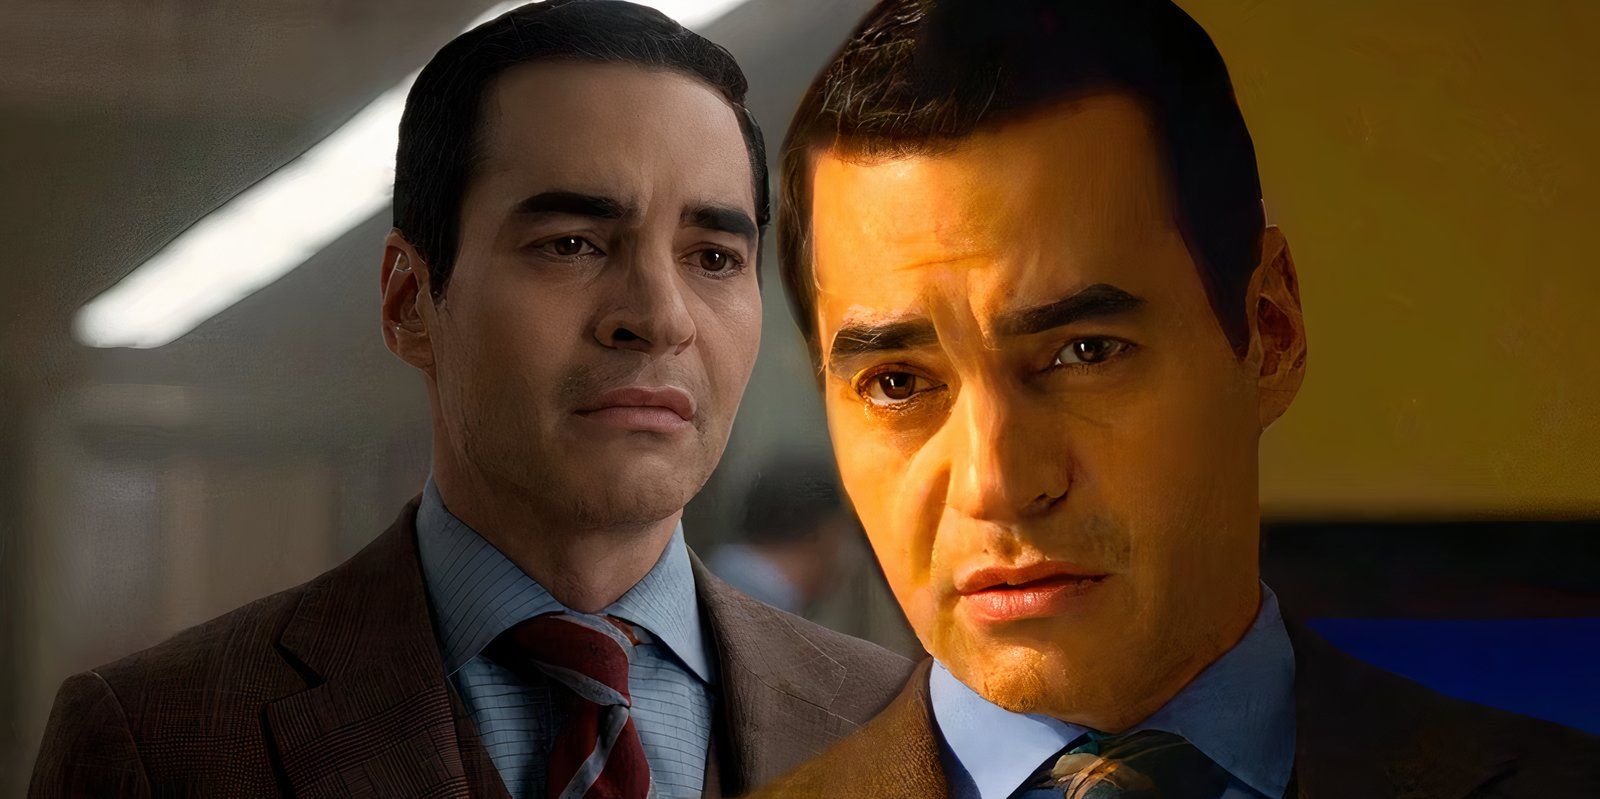 Ramón Rodríguez as Will looking sad next to Will looking suspiciously at a witness in Will Trent season 2